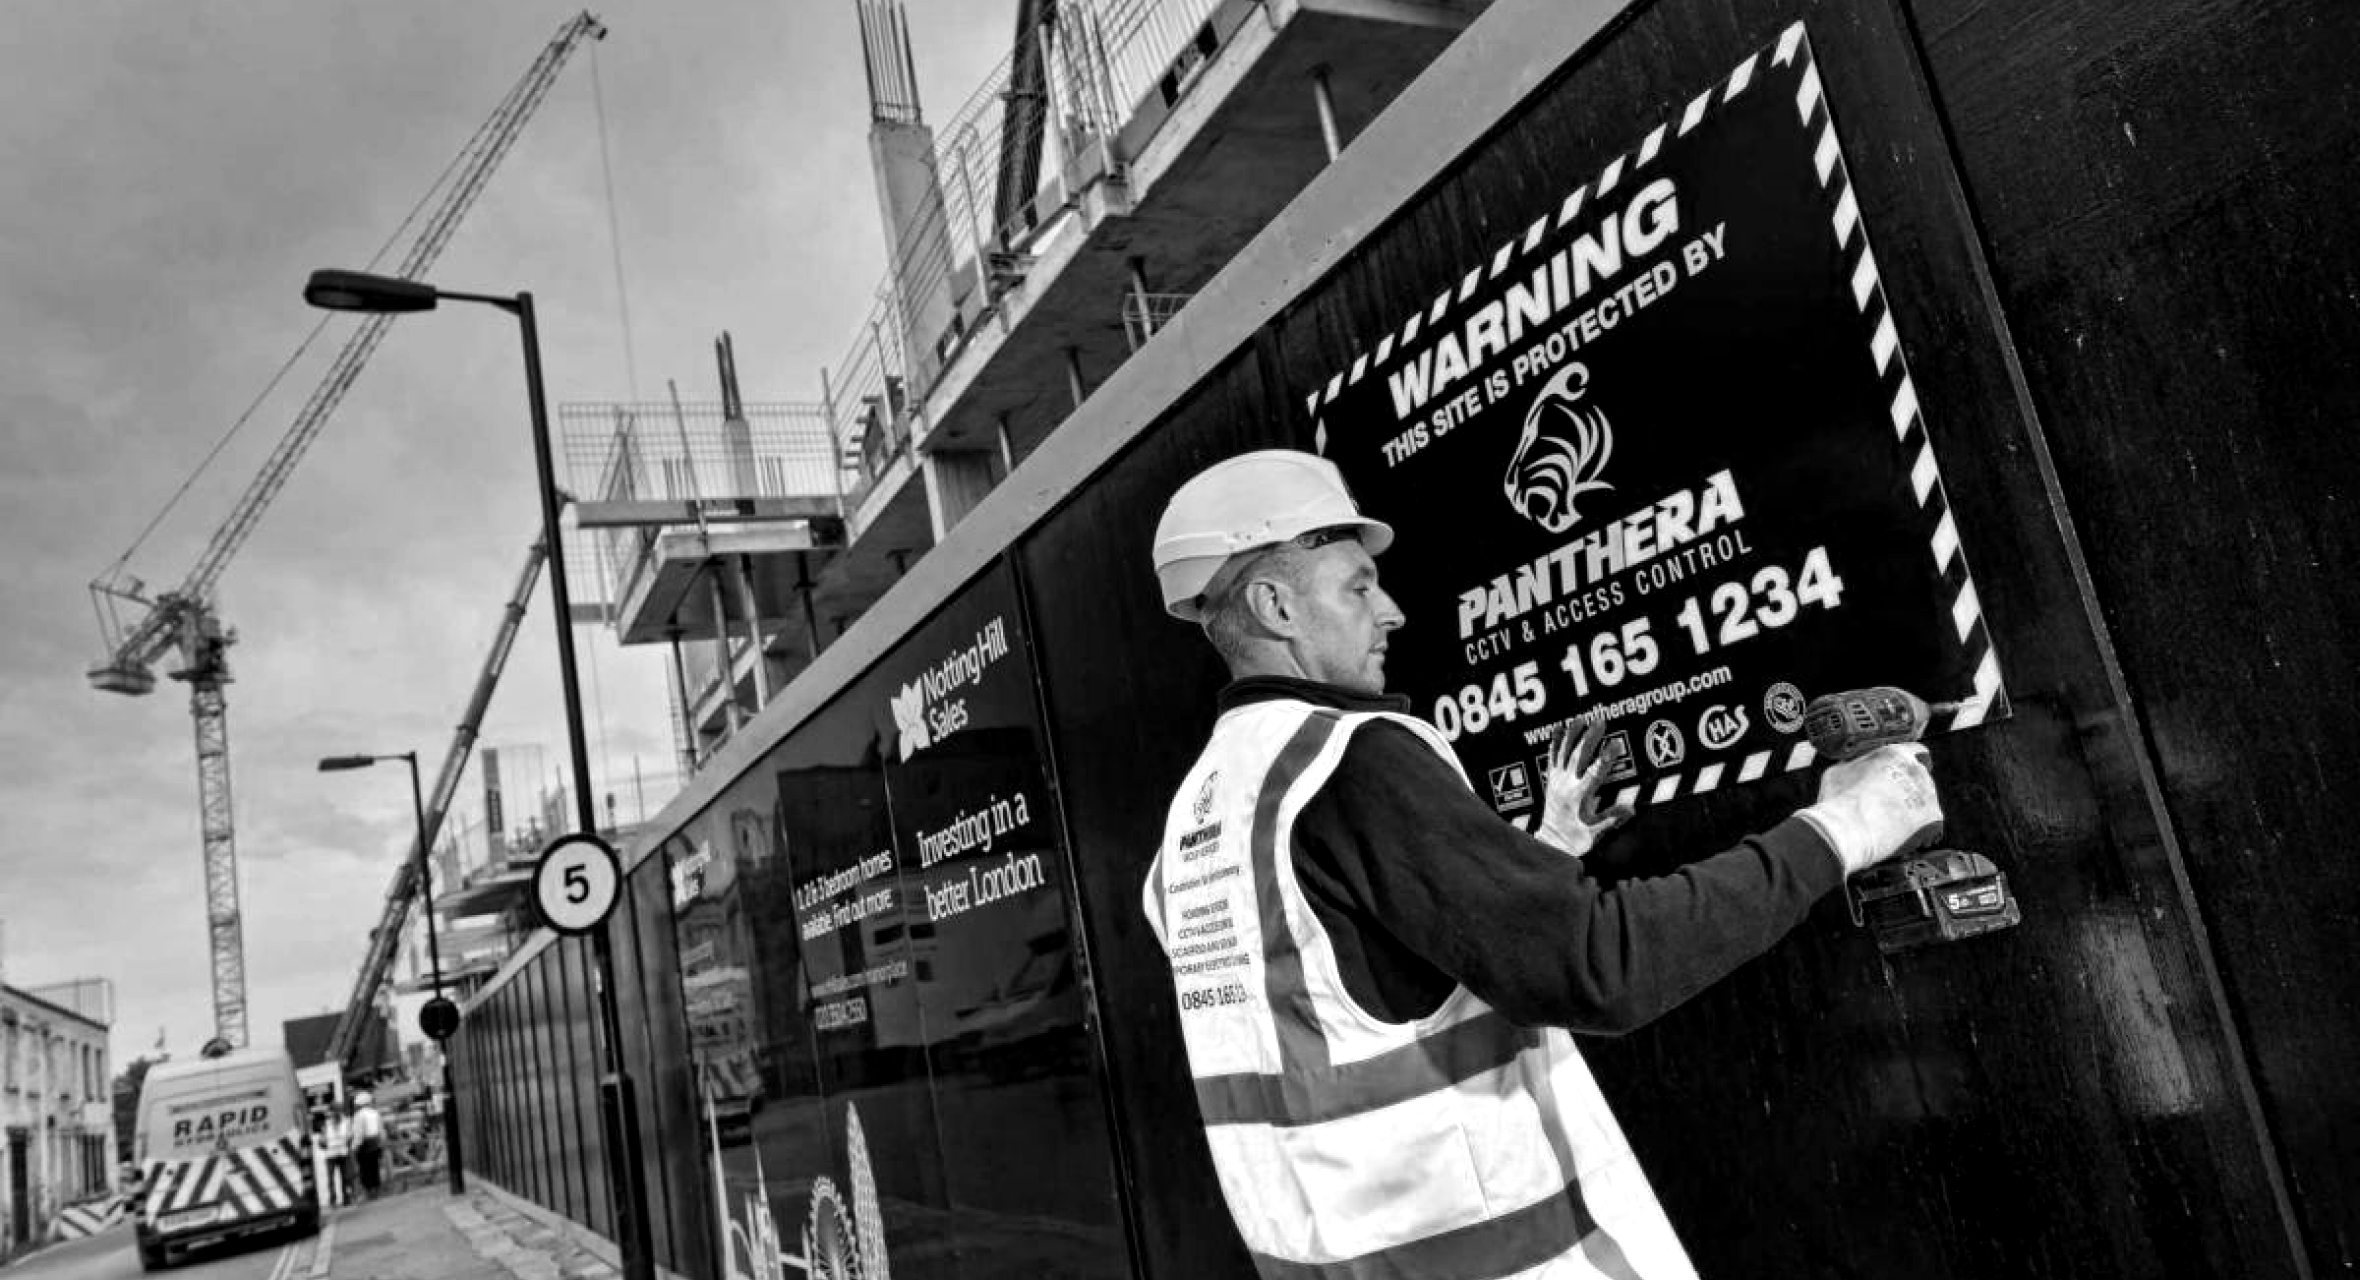 Black and white image with man in construction safety clothes putting up Panthera Group sign on construction site fence fence,